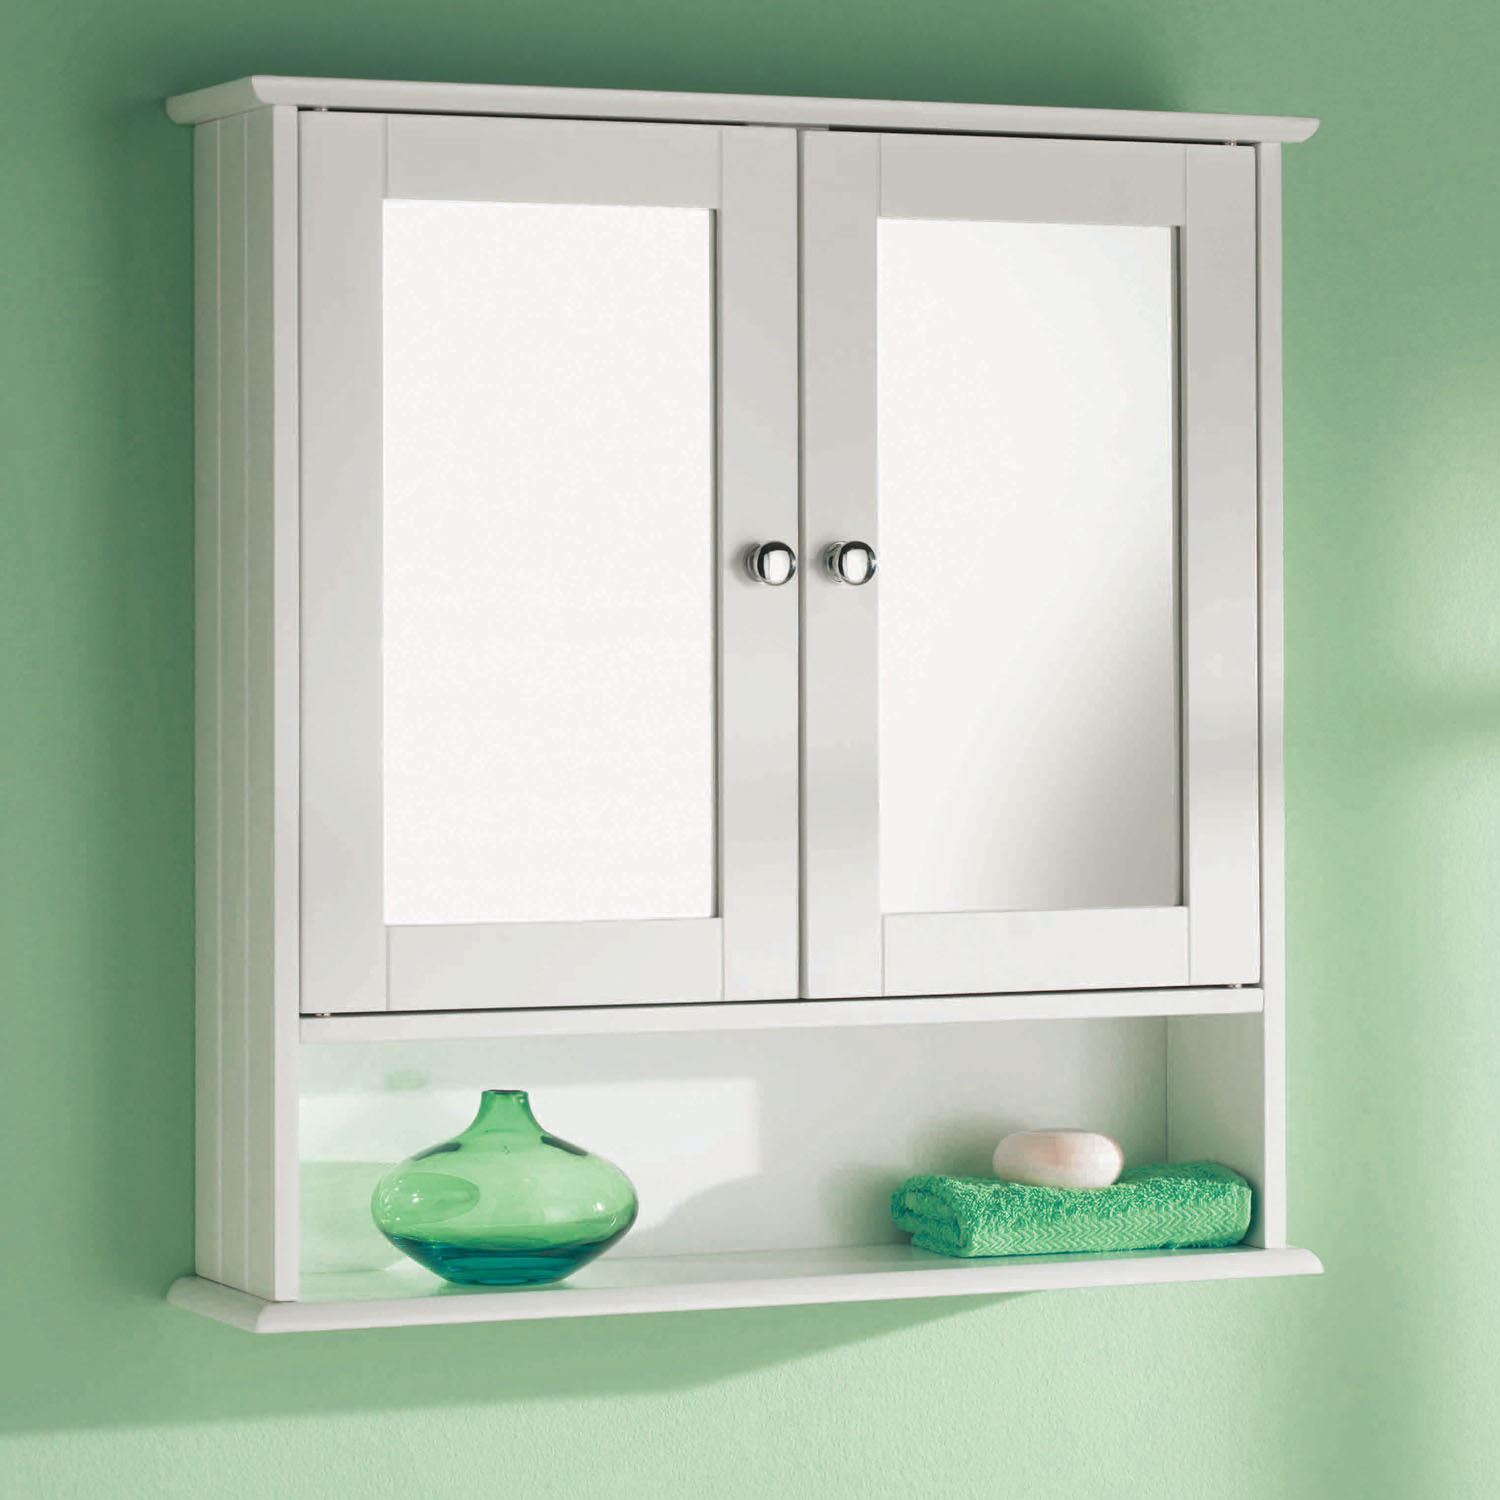 Double Door Mirror Shelf Wall Mounted Wood Storage Bathroom intended for sizing 1500 X 1500